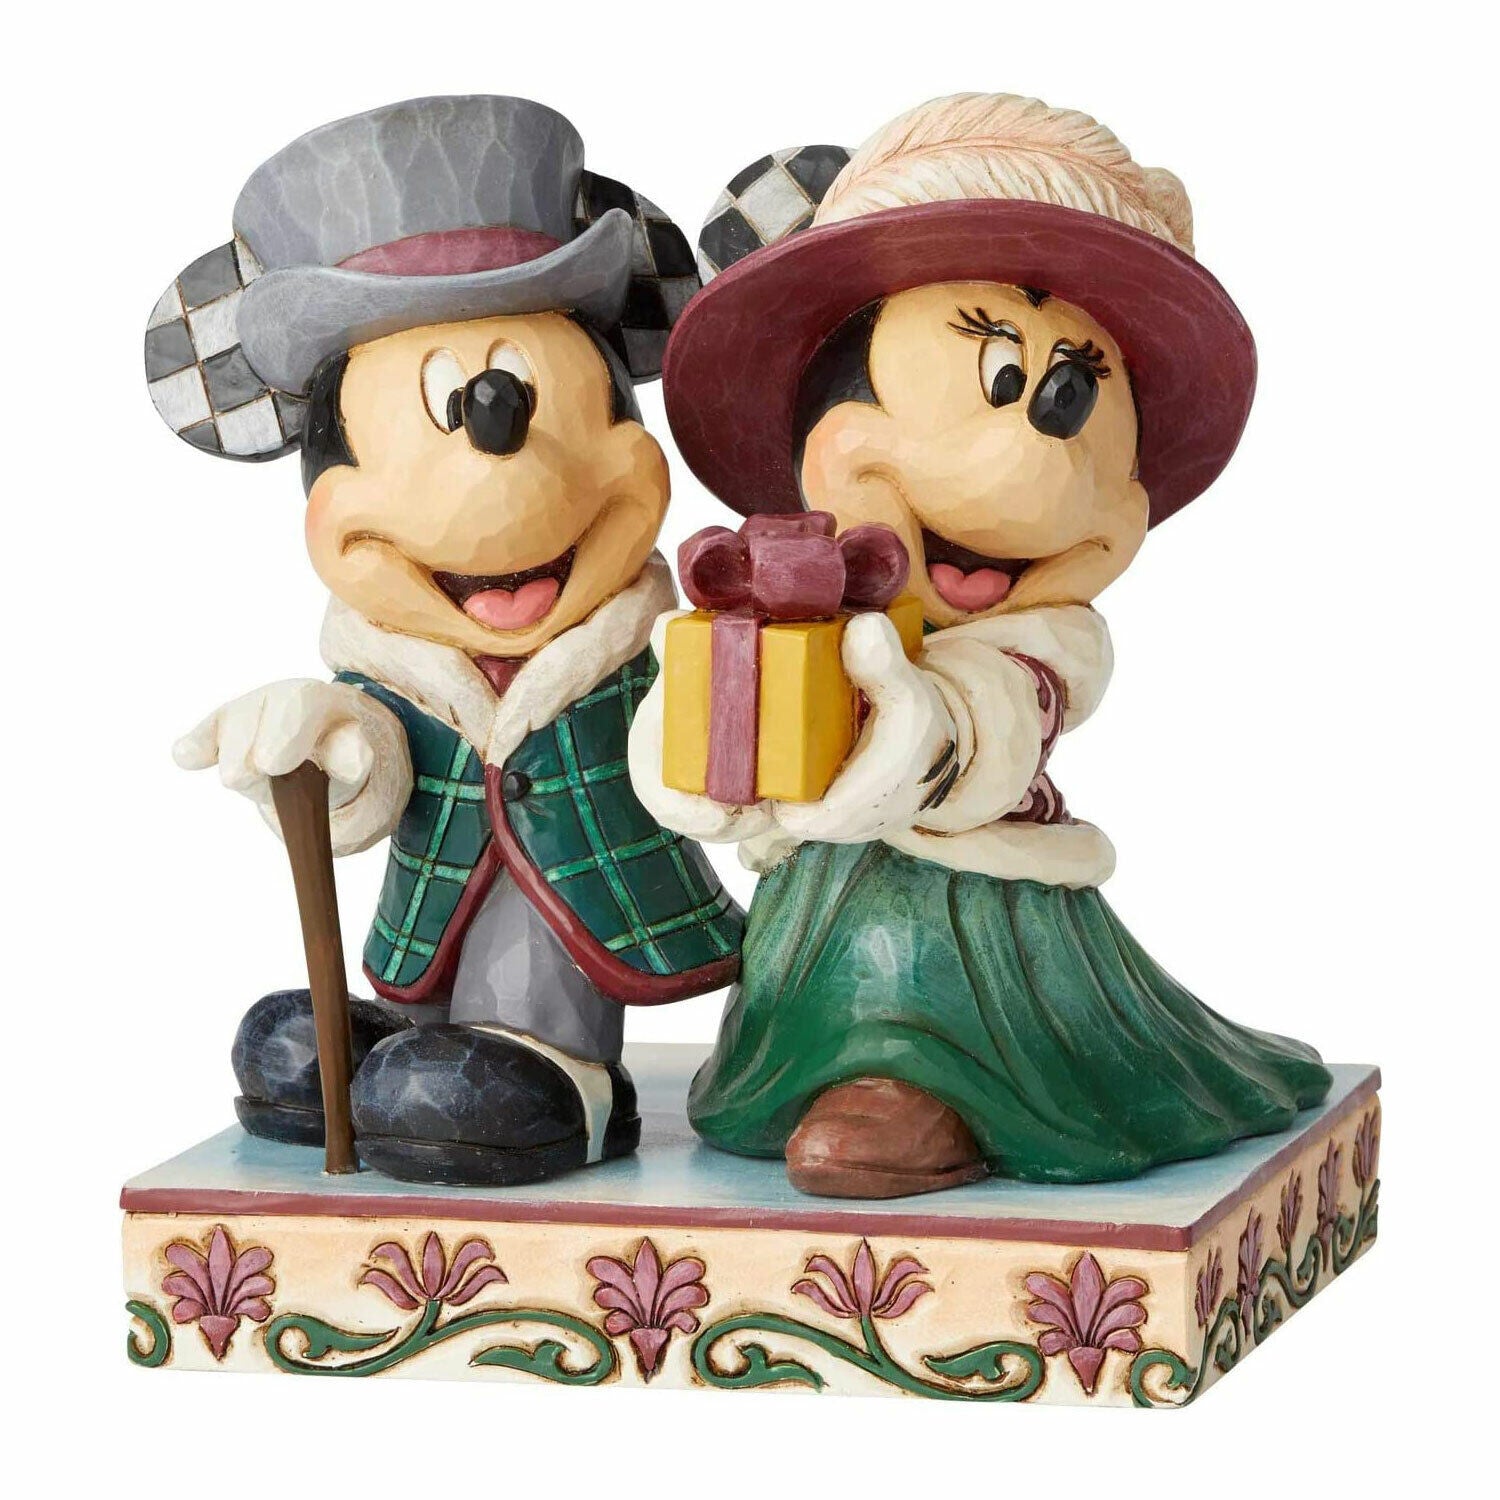 Disney Traditions Elegant Excursion Figurine - Mickey and Minnie - New in Box